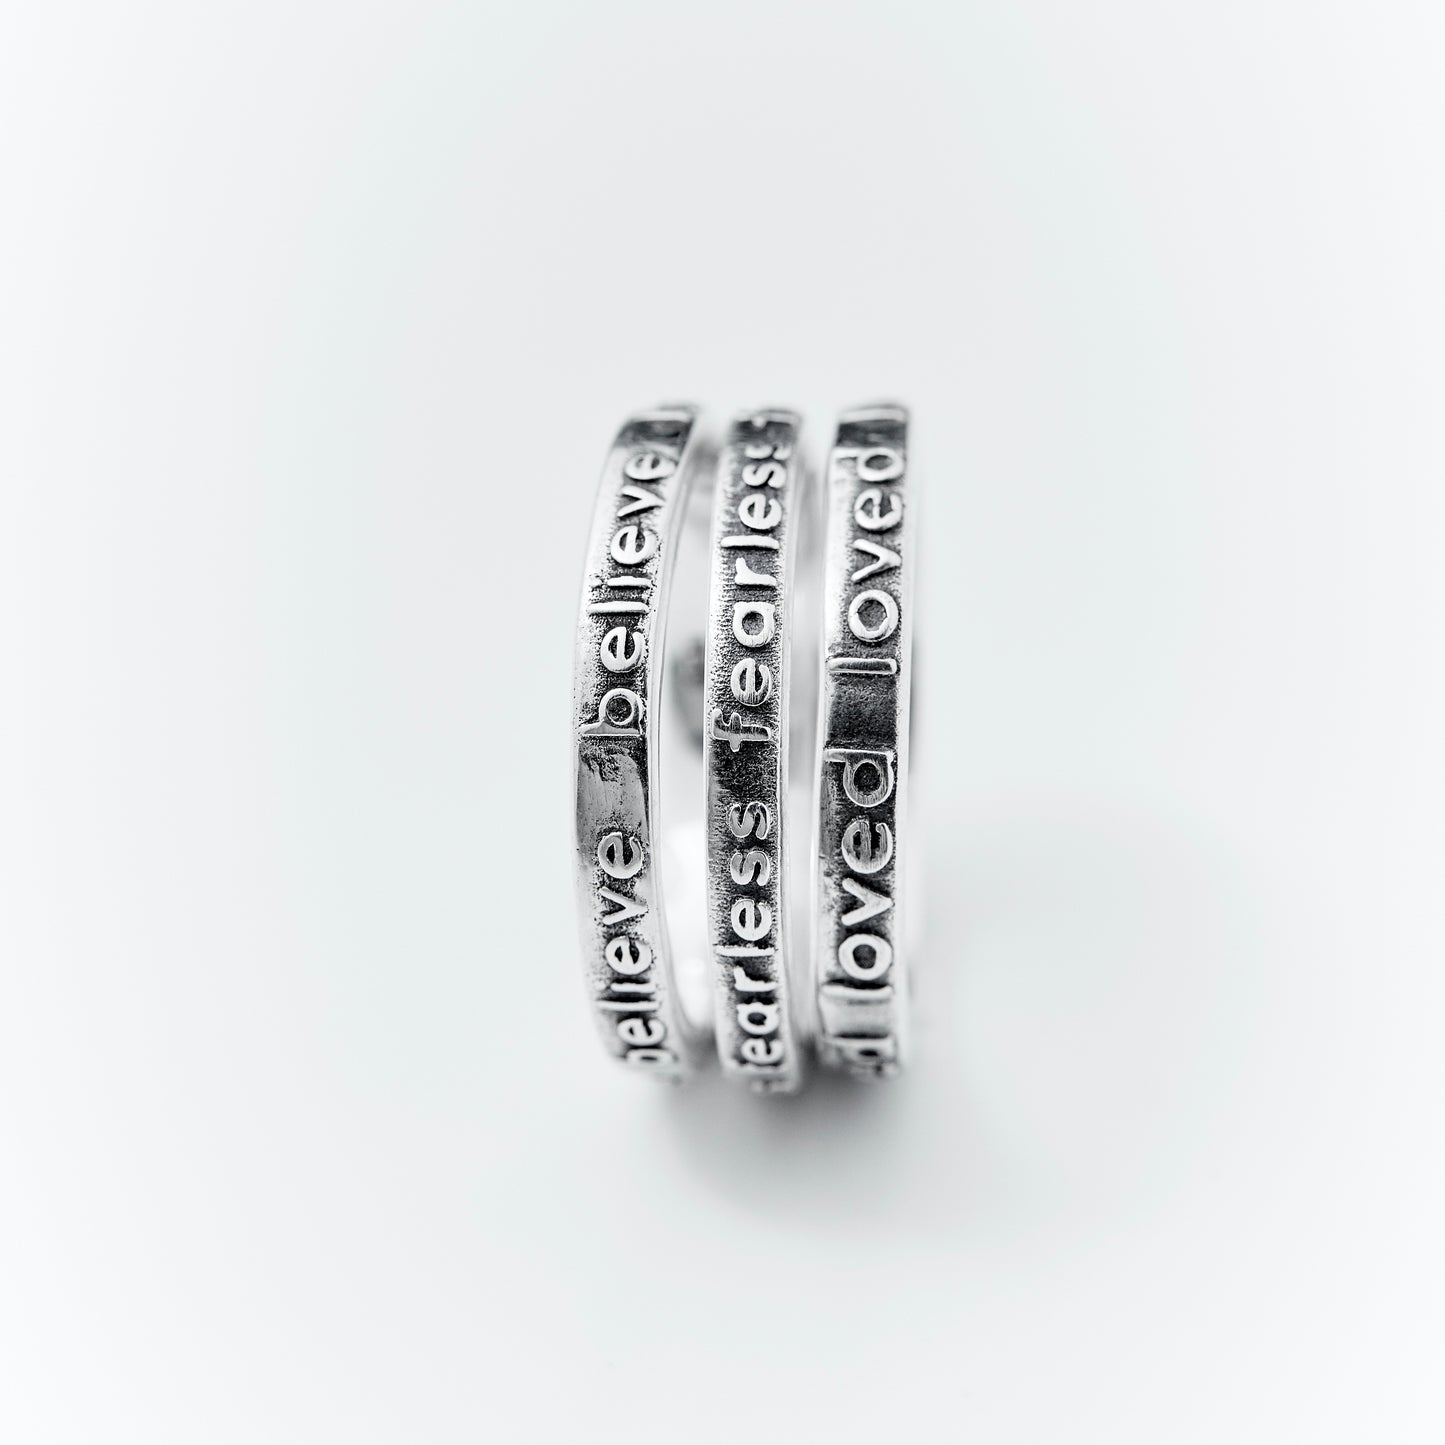 believe stacking ring